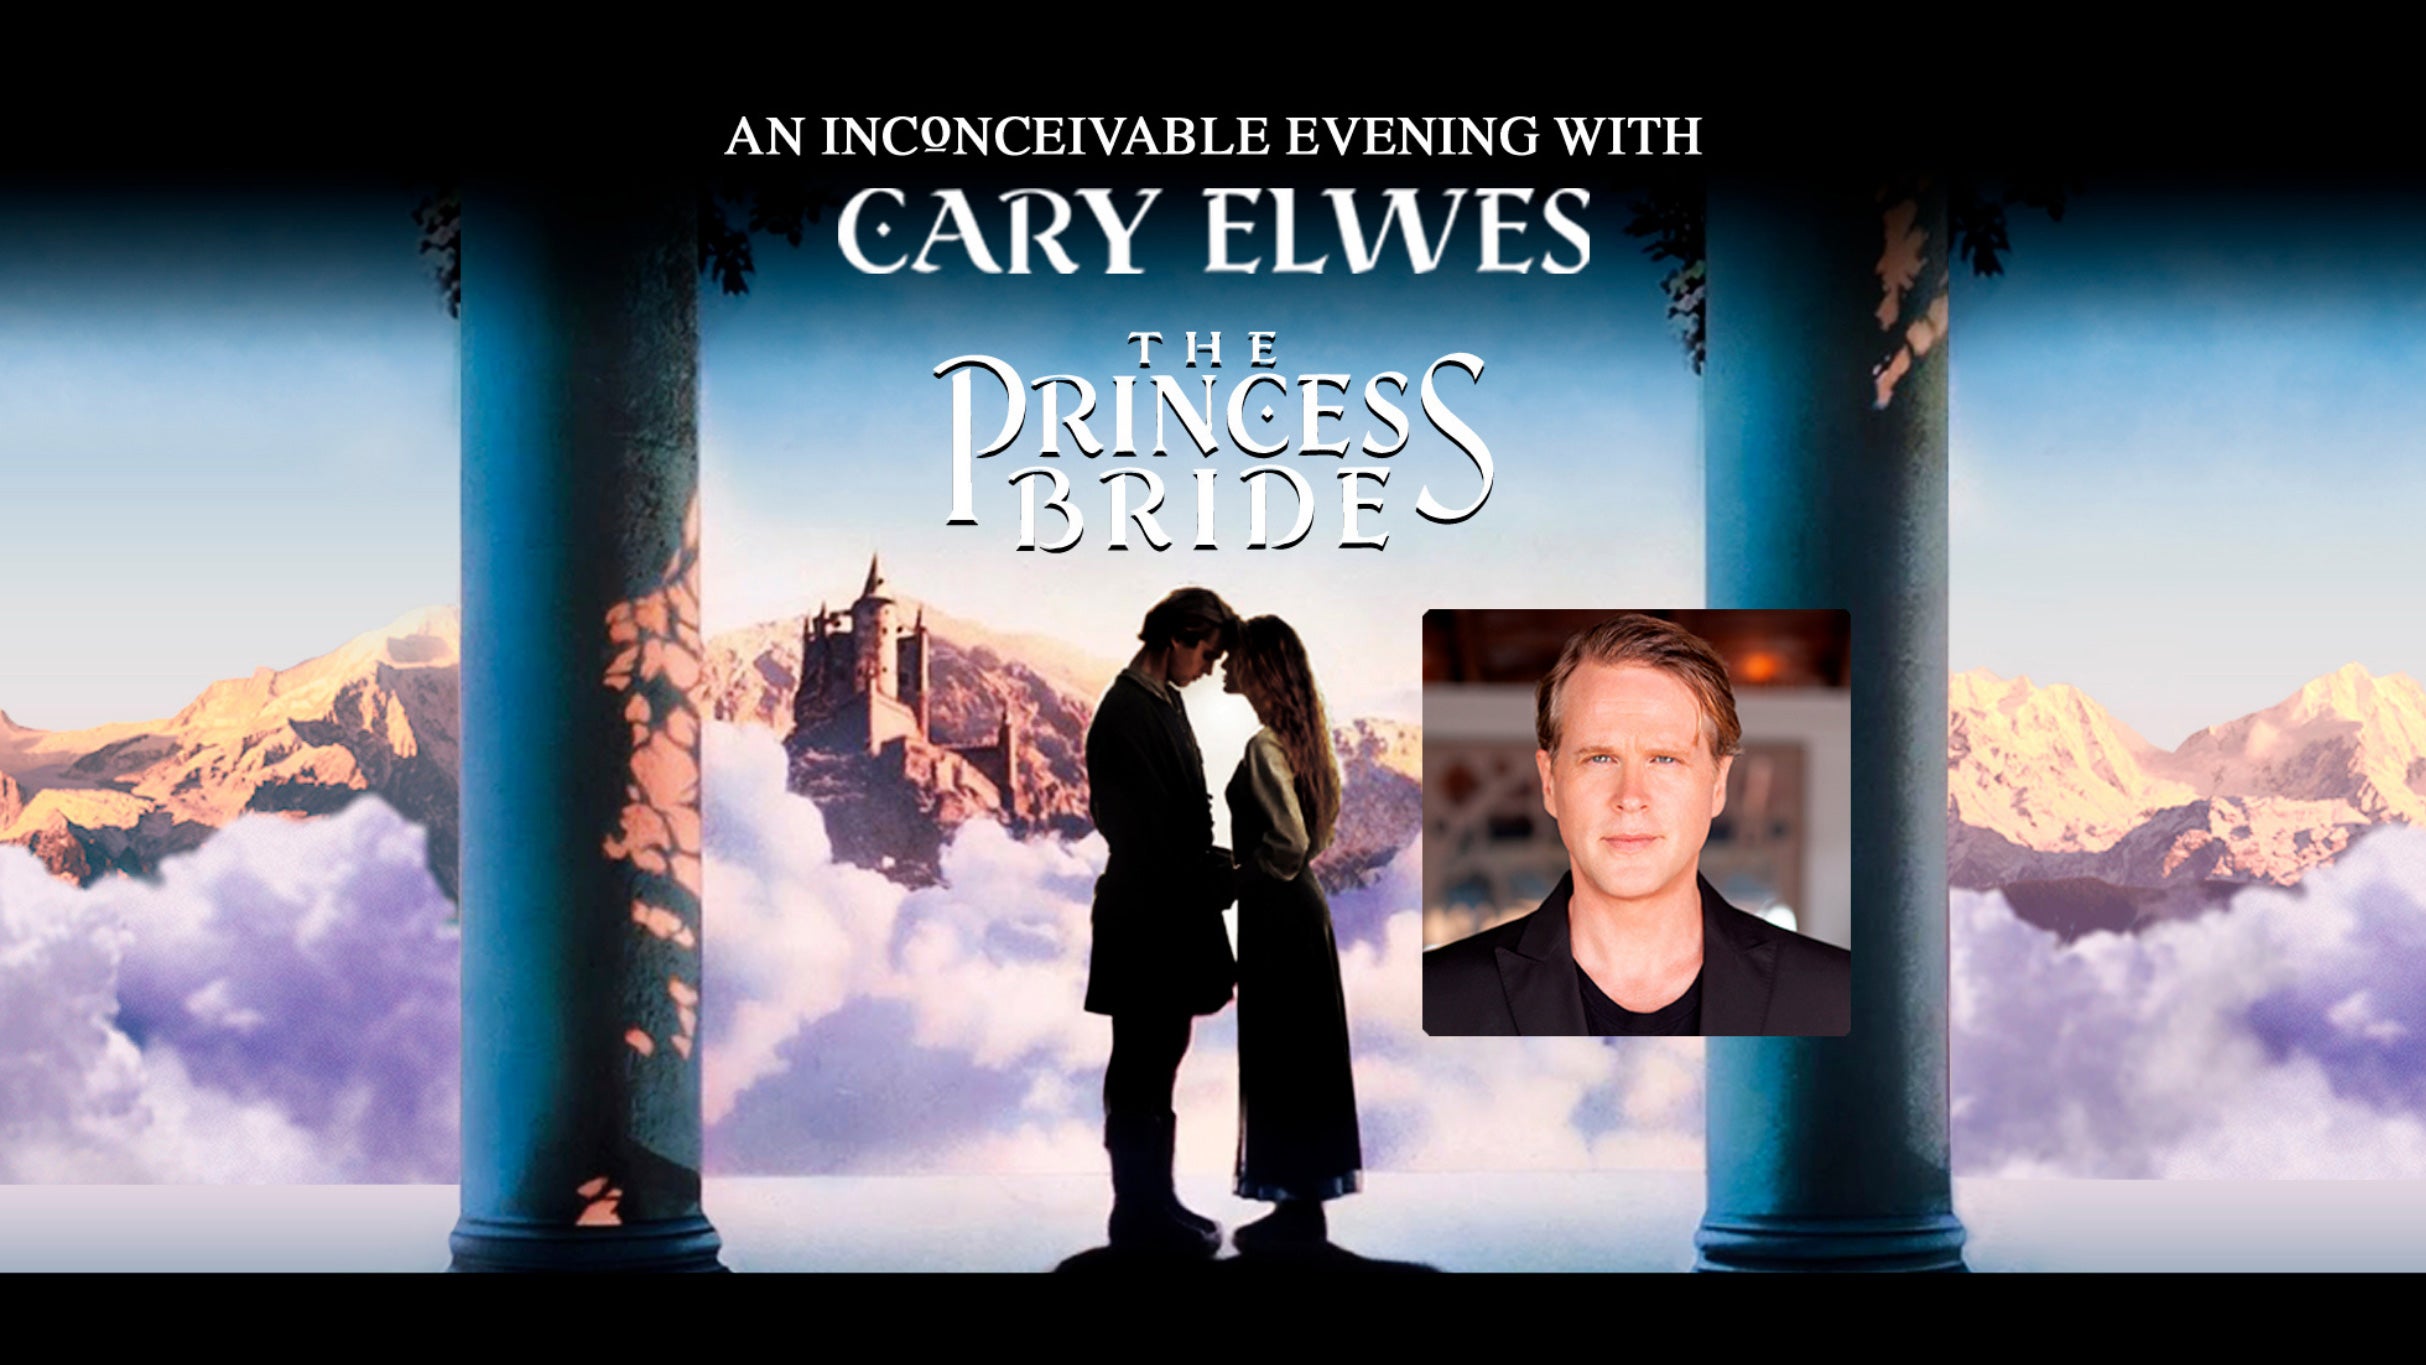 The Princess Bride: An Inconceivable Evening with Cary Elwes in Joliet promo photo for Exclusive presale offer code